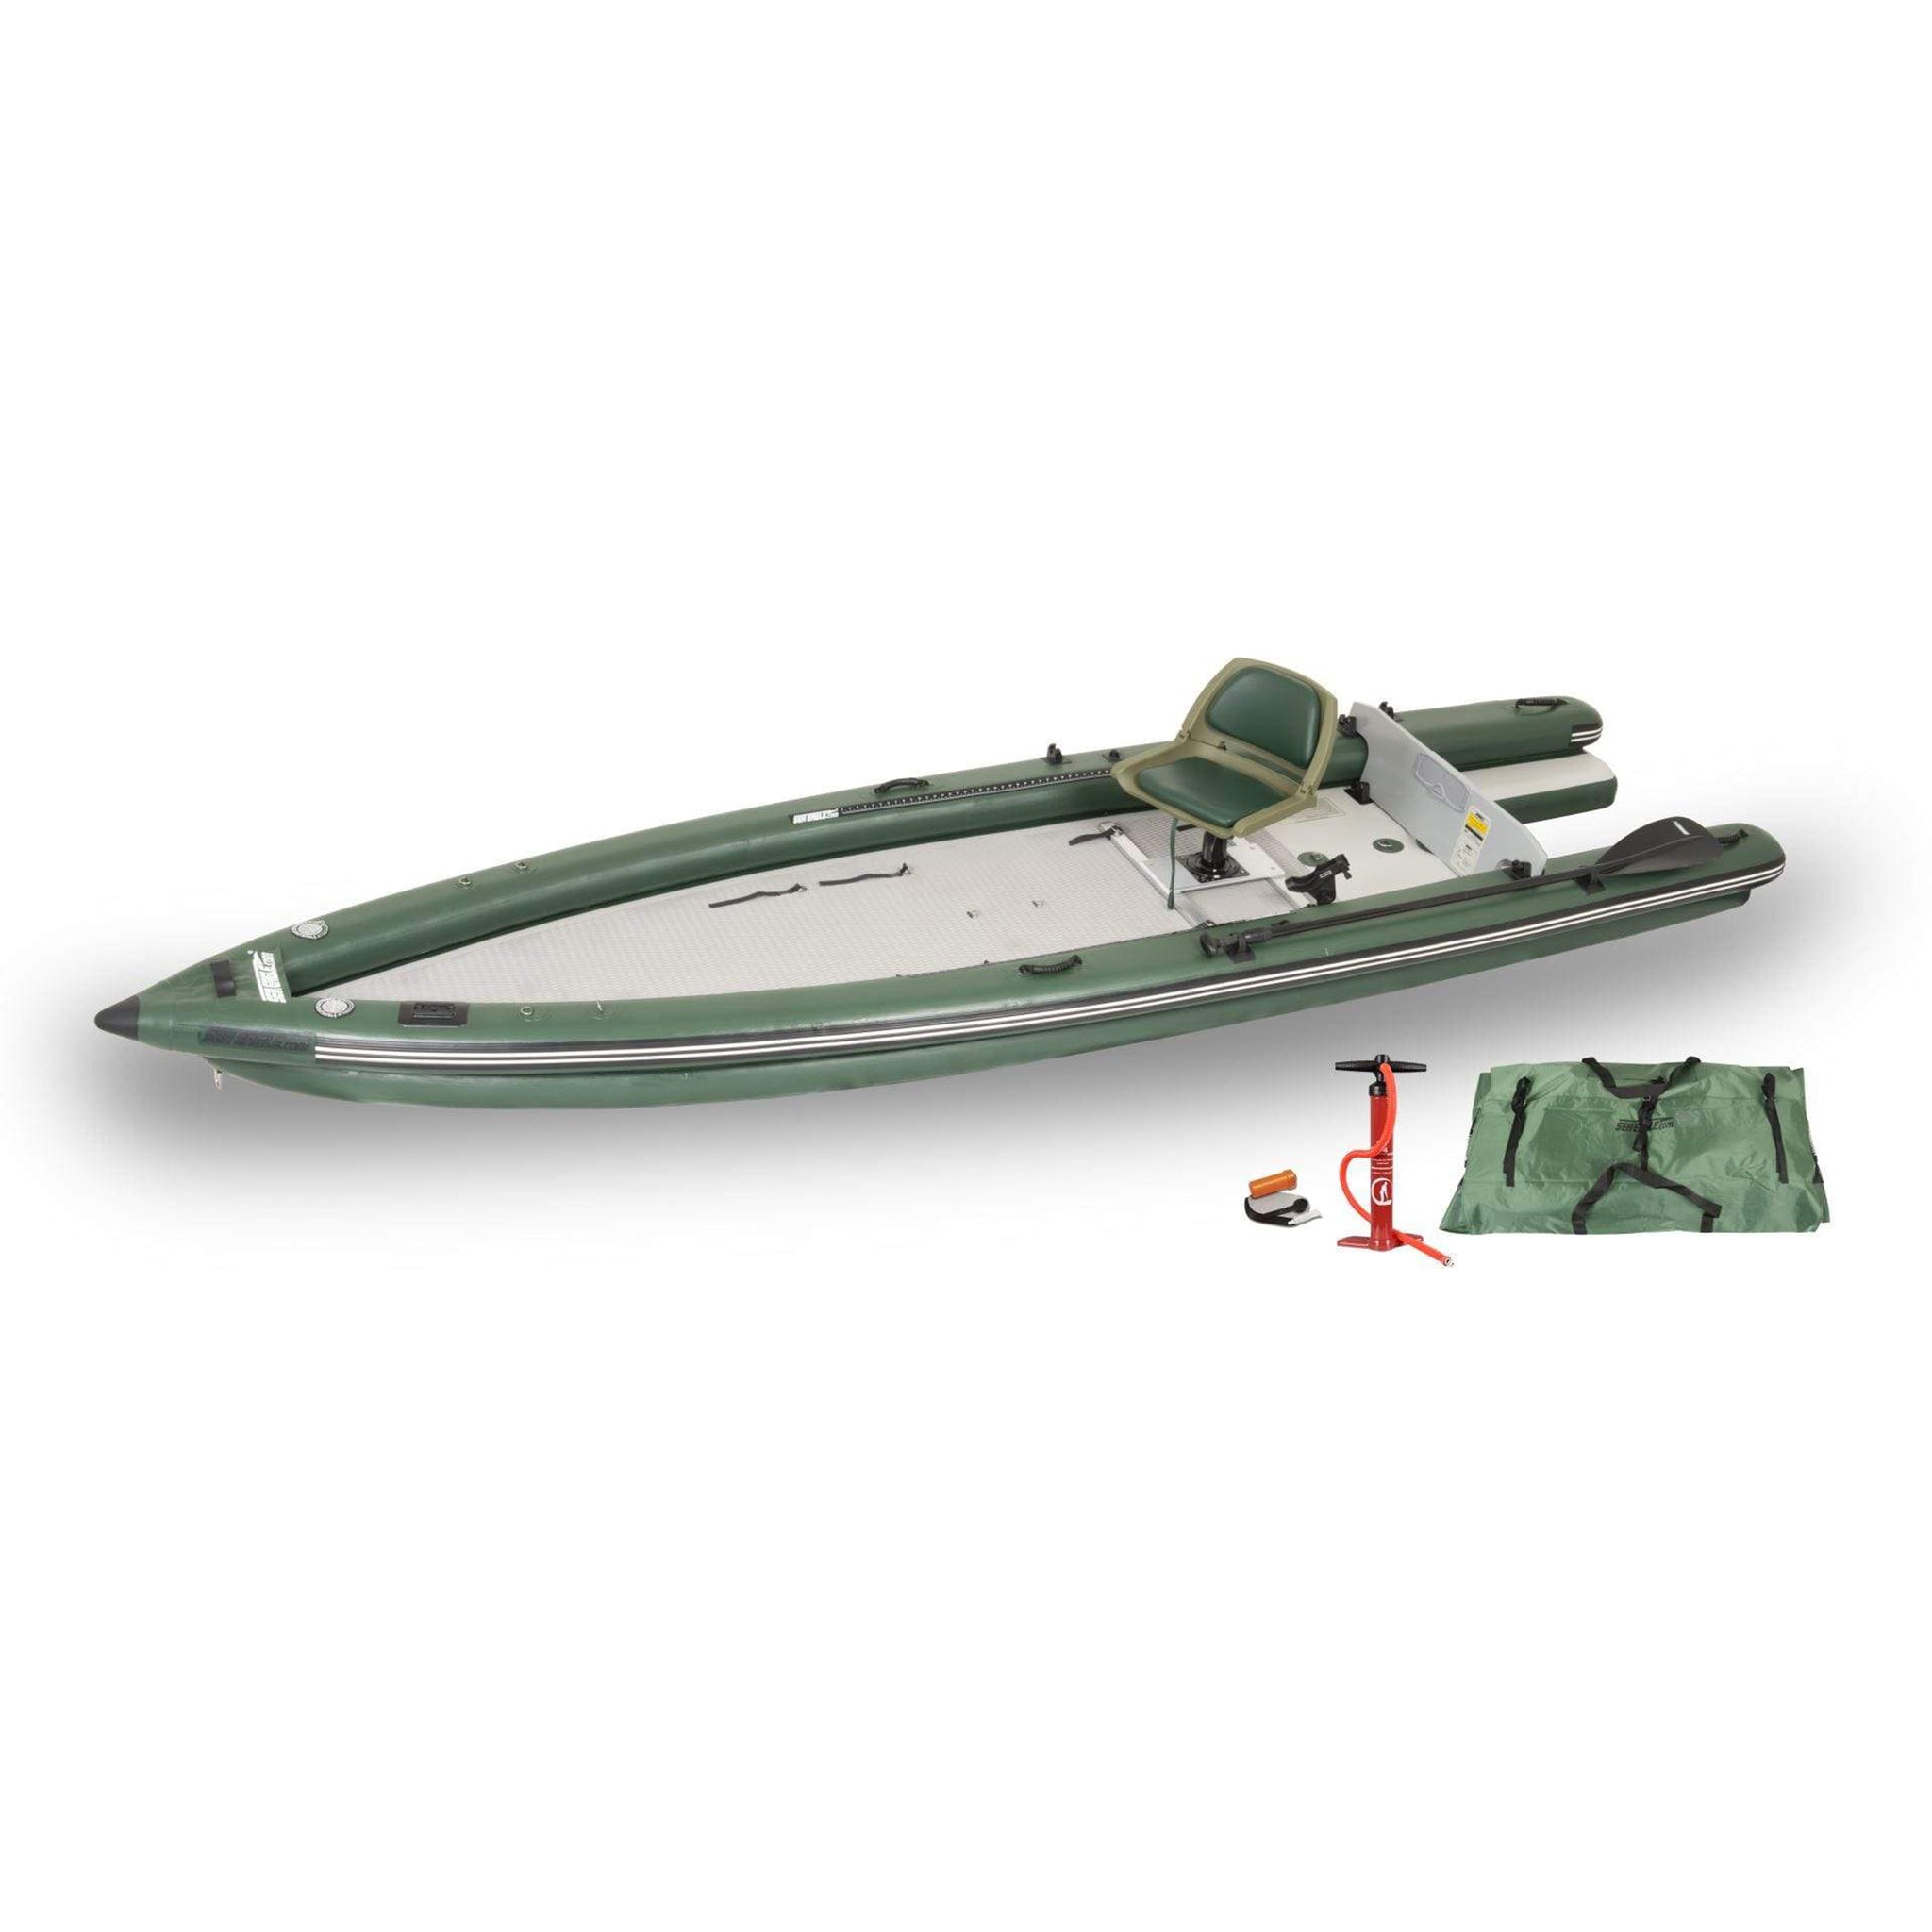 High quality inflatable sea fishing boat